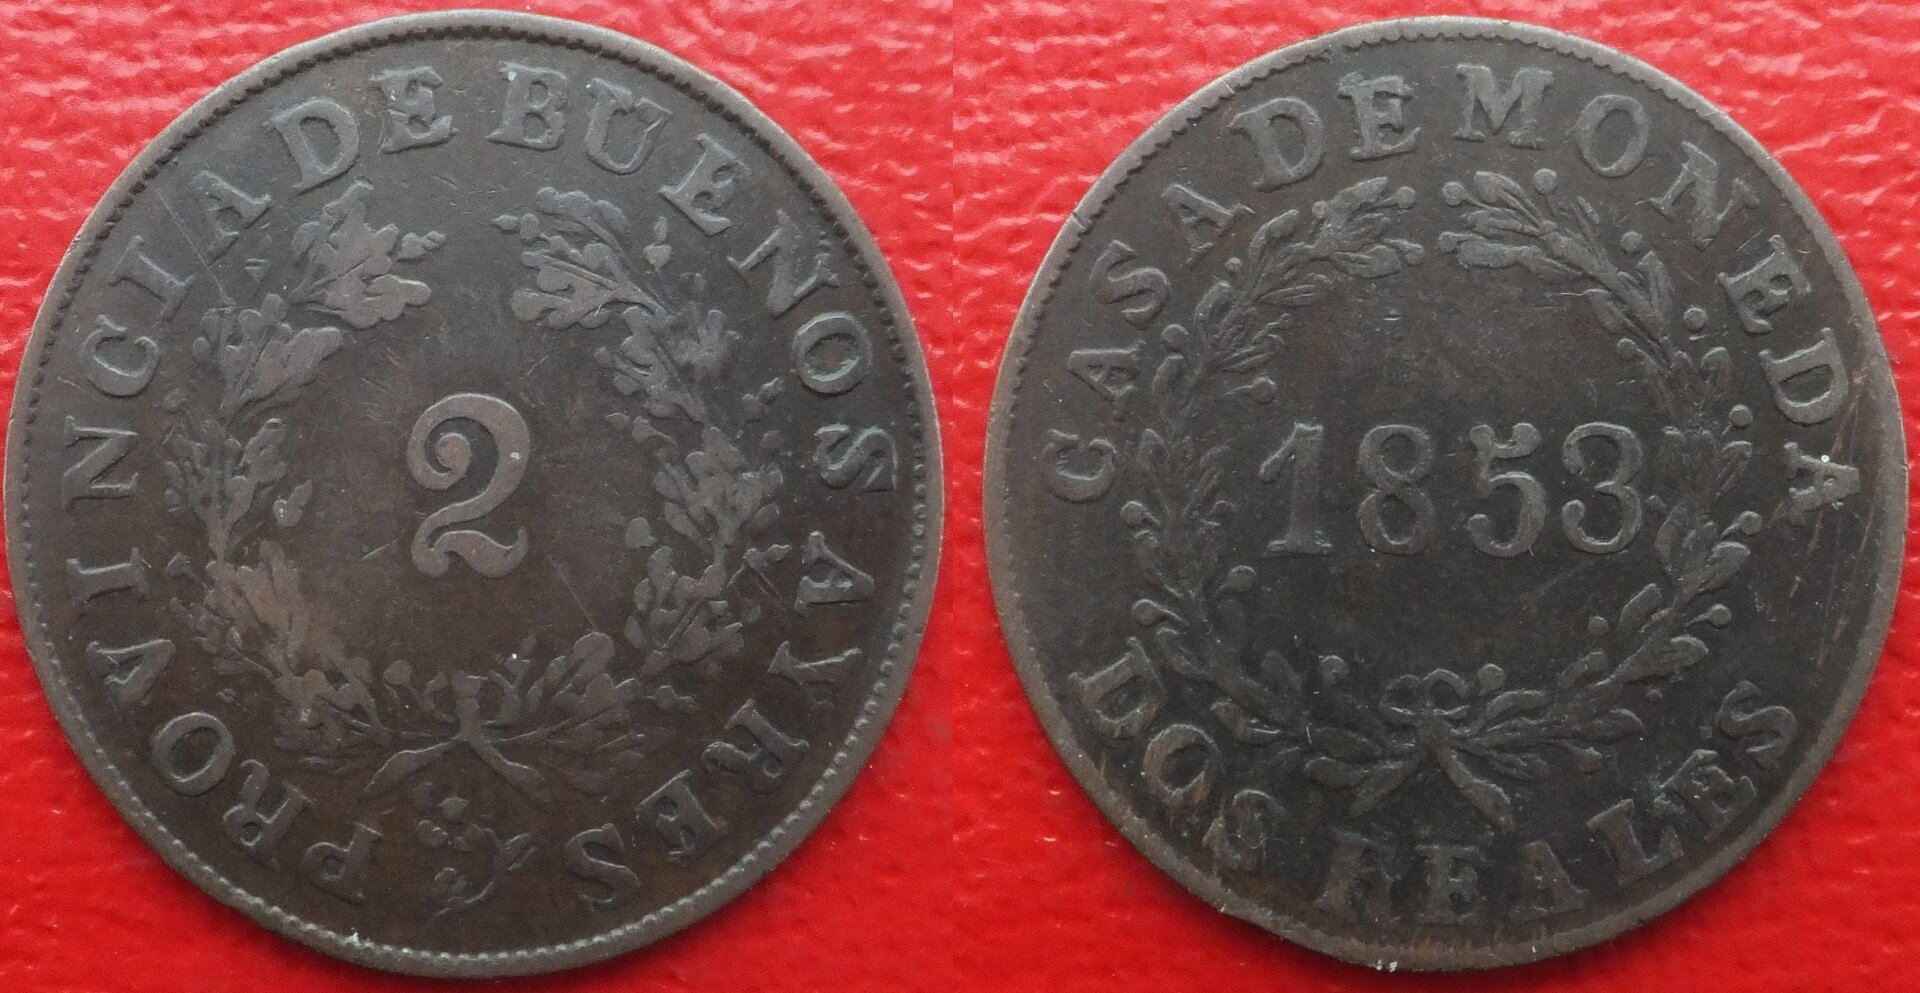 Argentina - Buenos Aires 2 reales 1853 (3).jpg